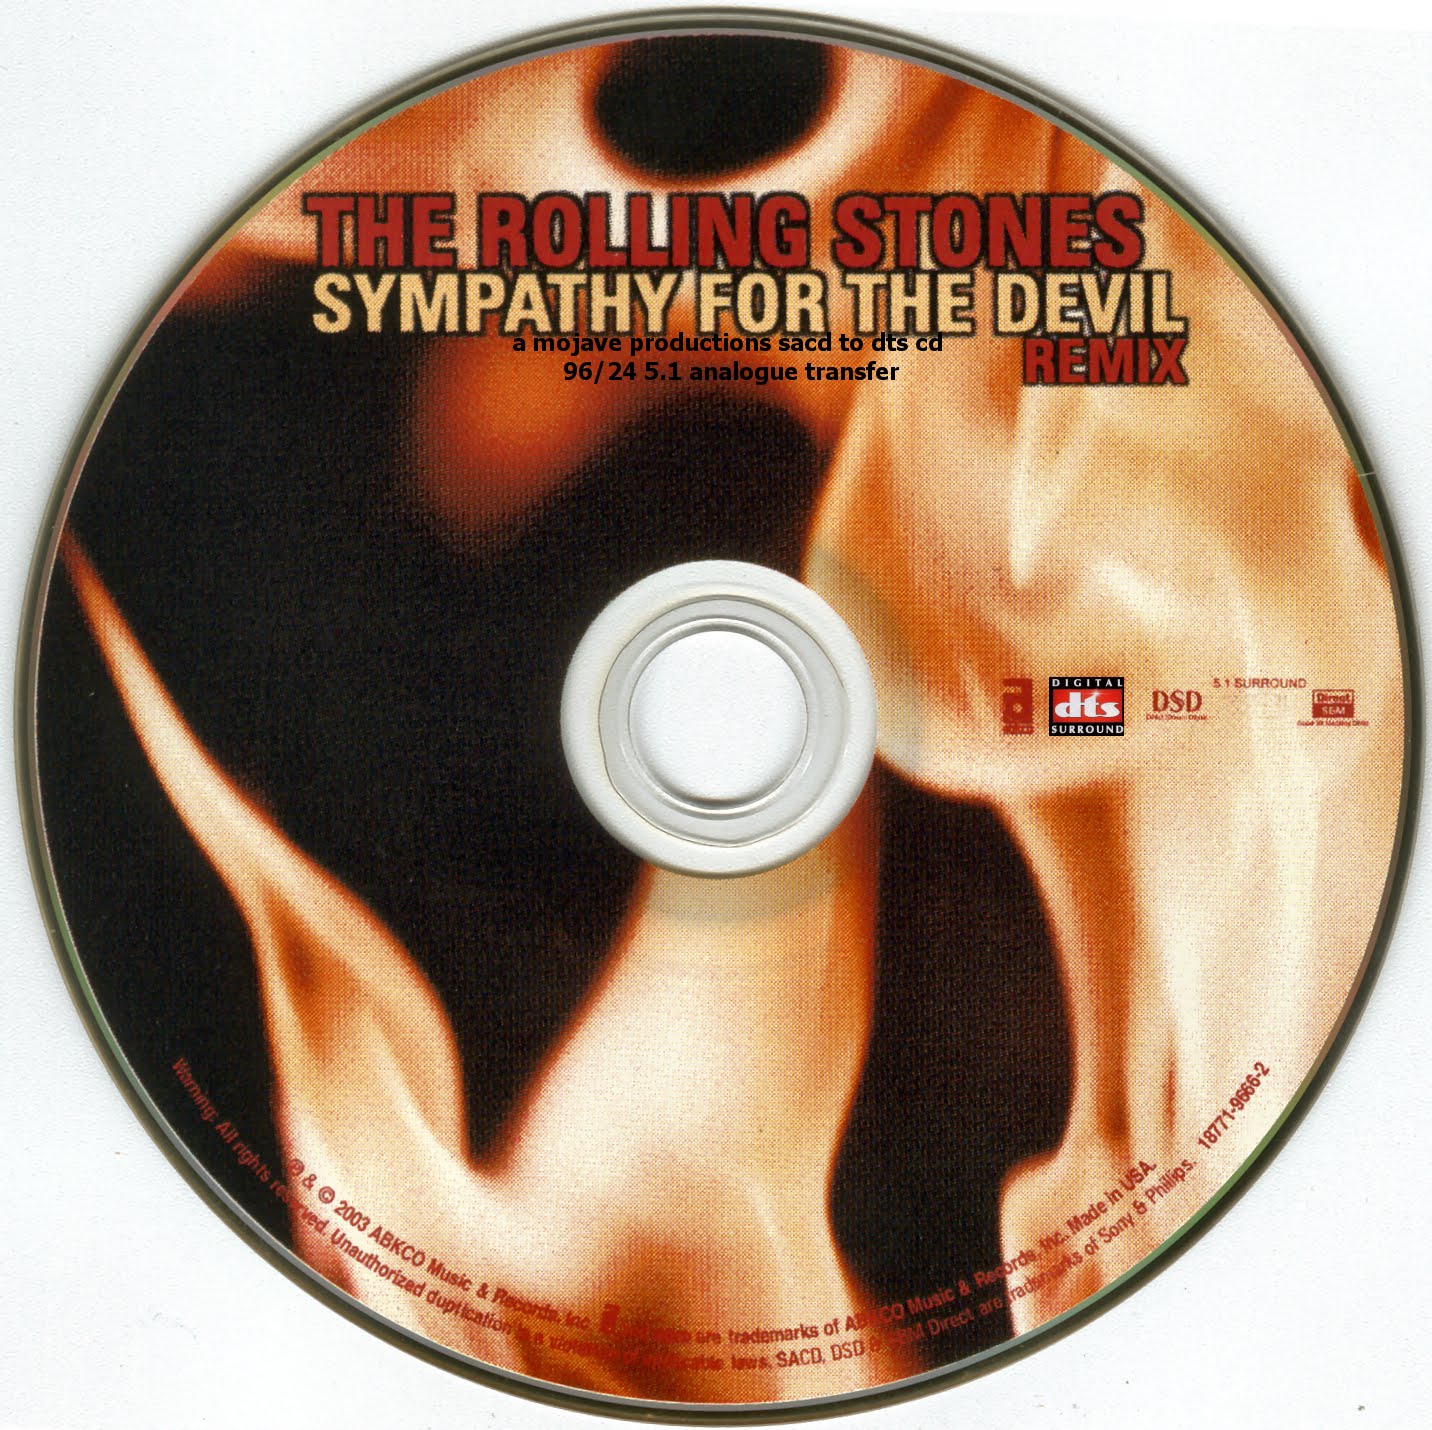 Rolling stones sympathy for the devil